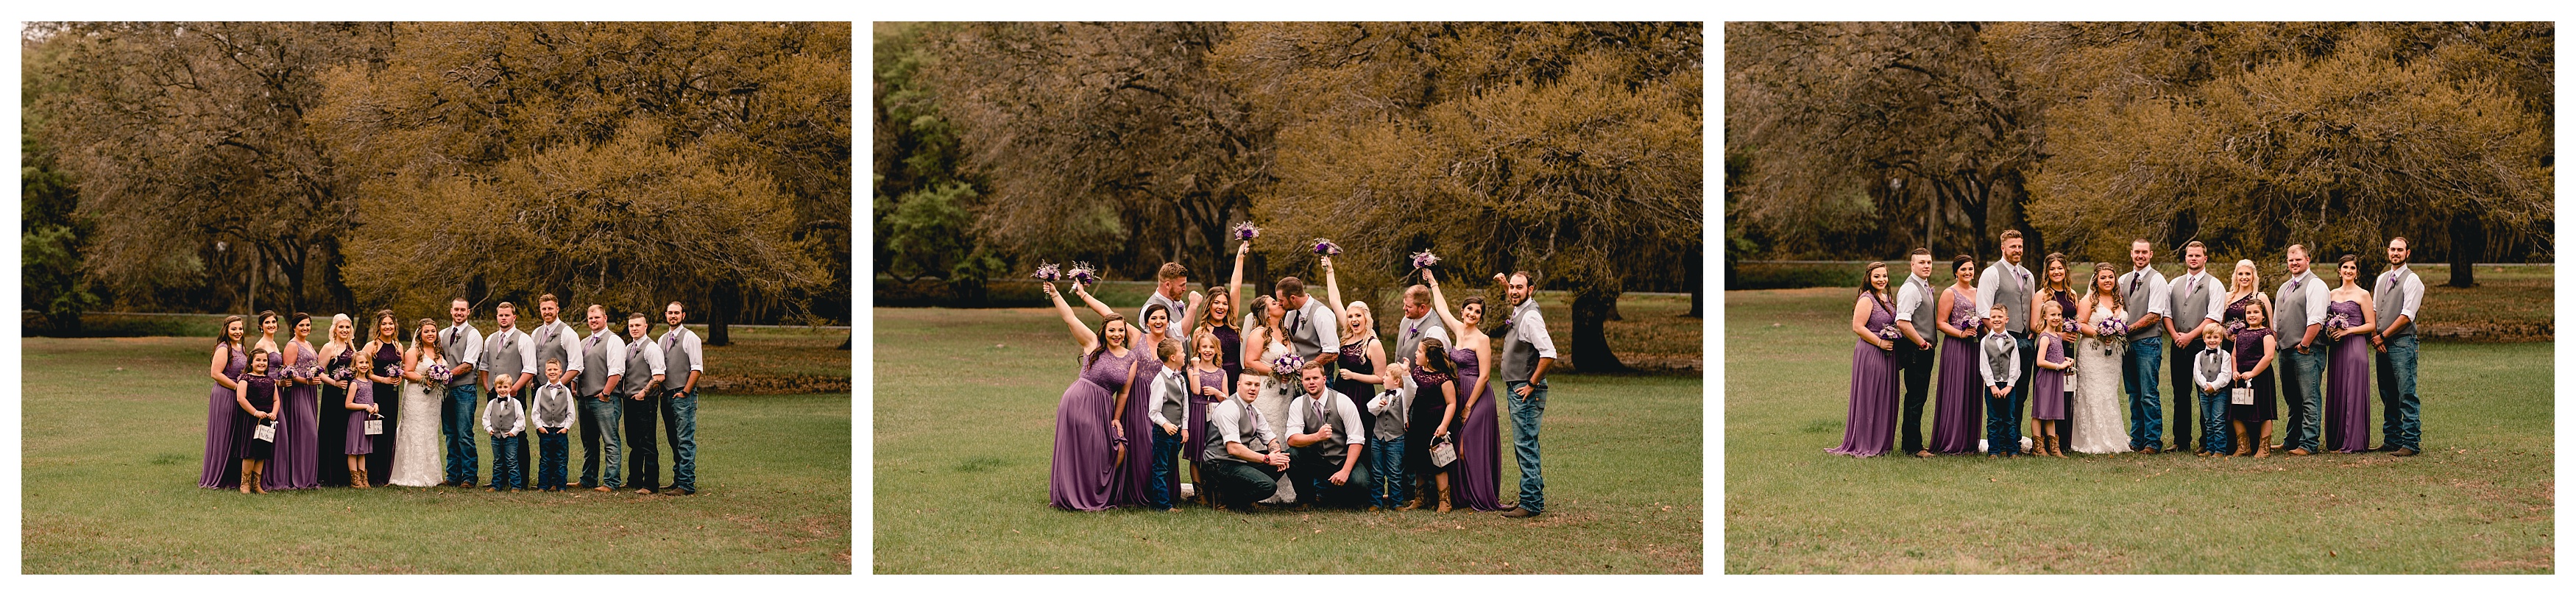 Bridal party portraits in Tallahassee, Florida by professional photographer at Bradley's Pond. Shelly Williams Photography